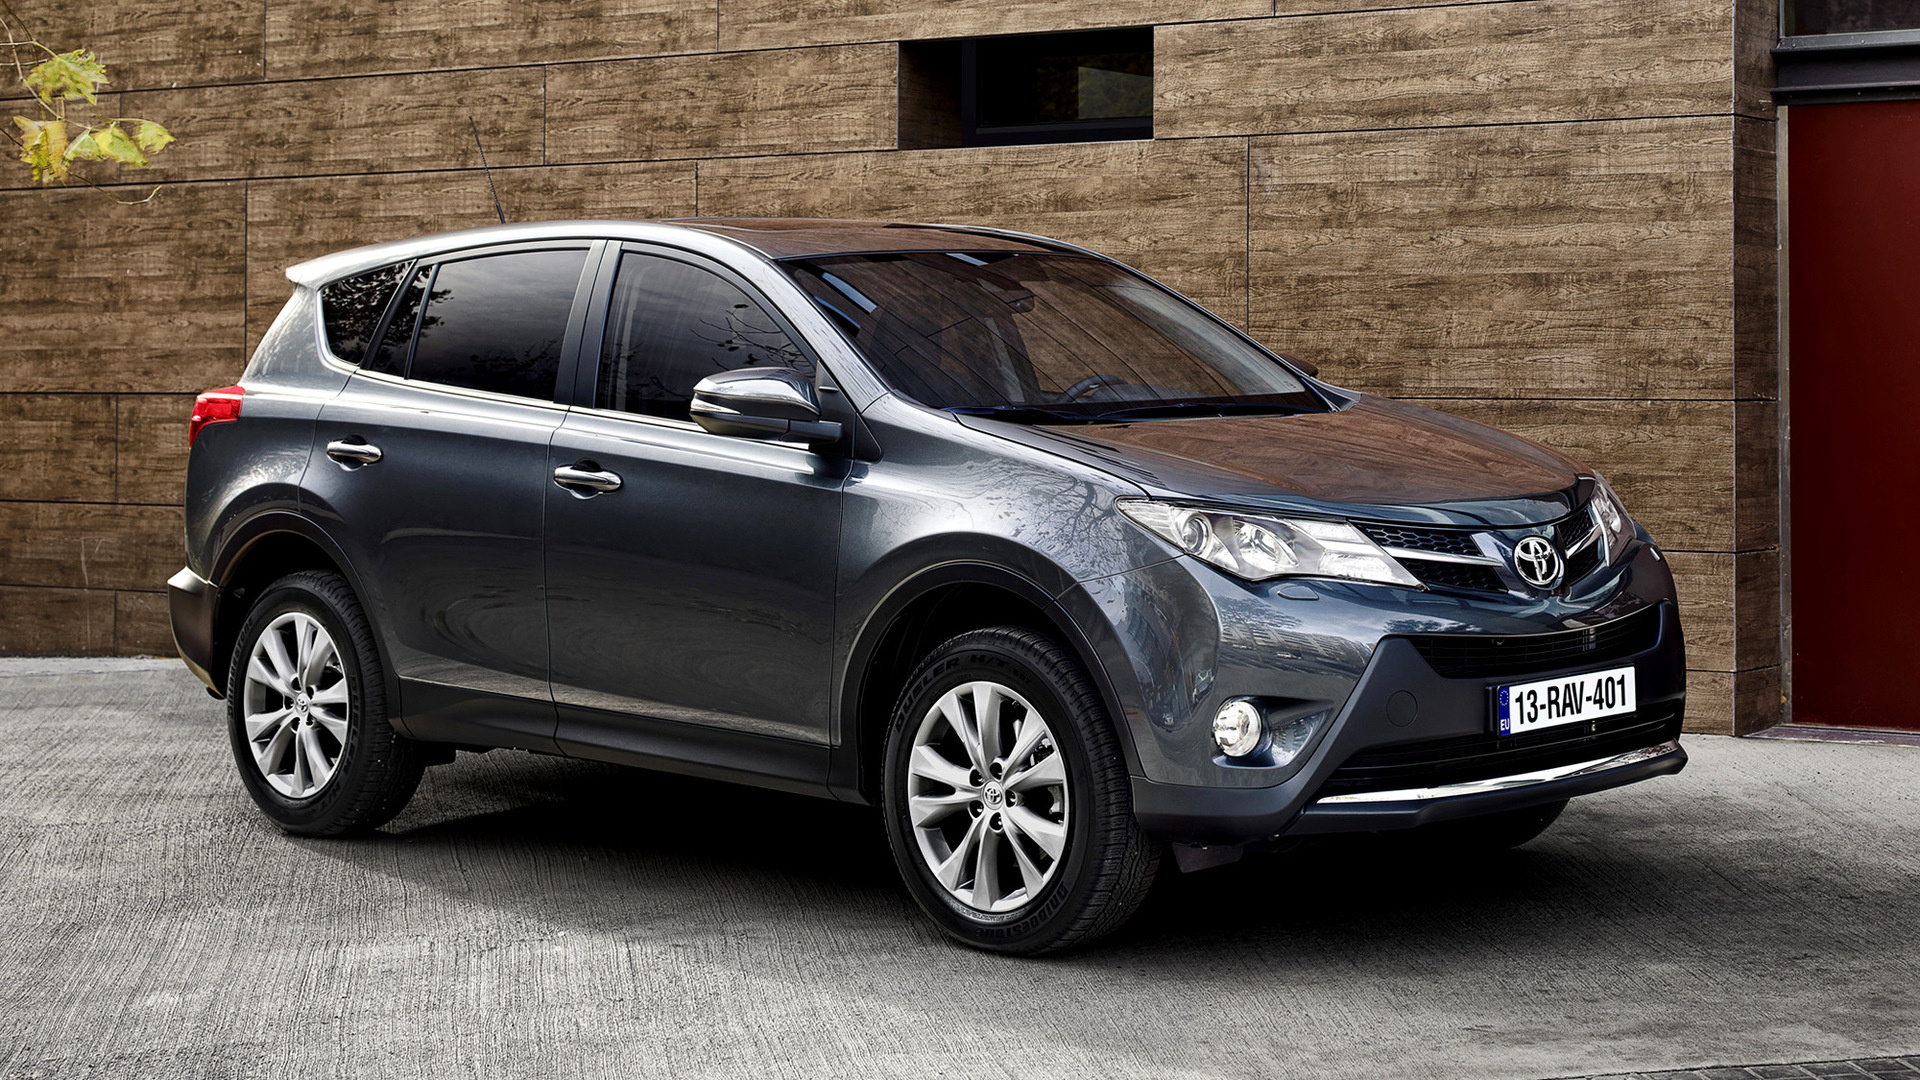 Toyota RAV4, Reliable and durable, High-definition wallpapers, Unmatched performance, 1920x1080 Full HD Desktop